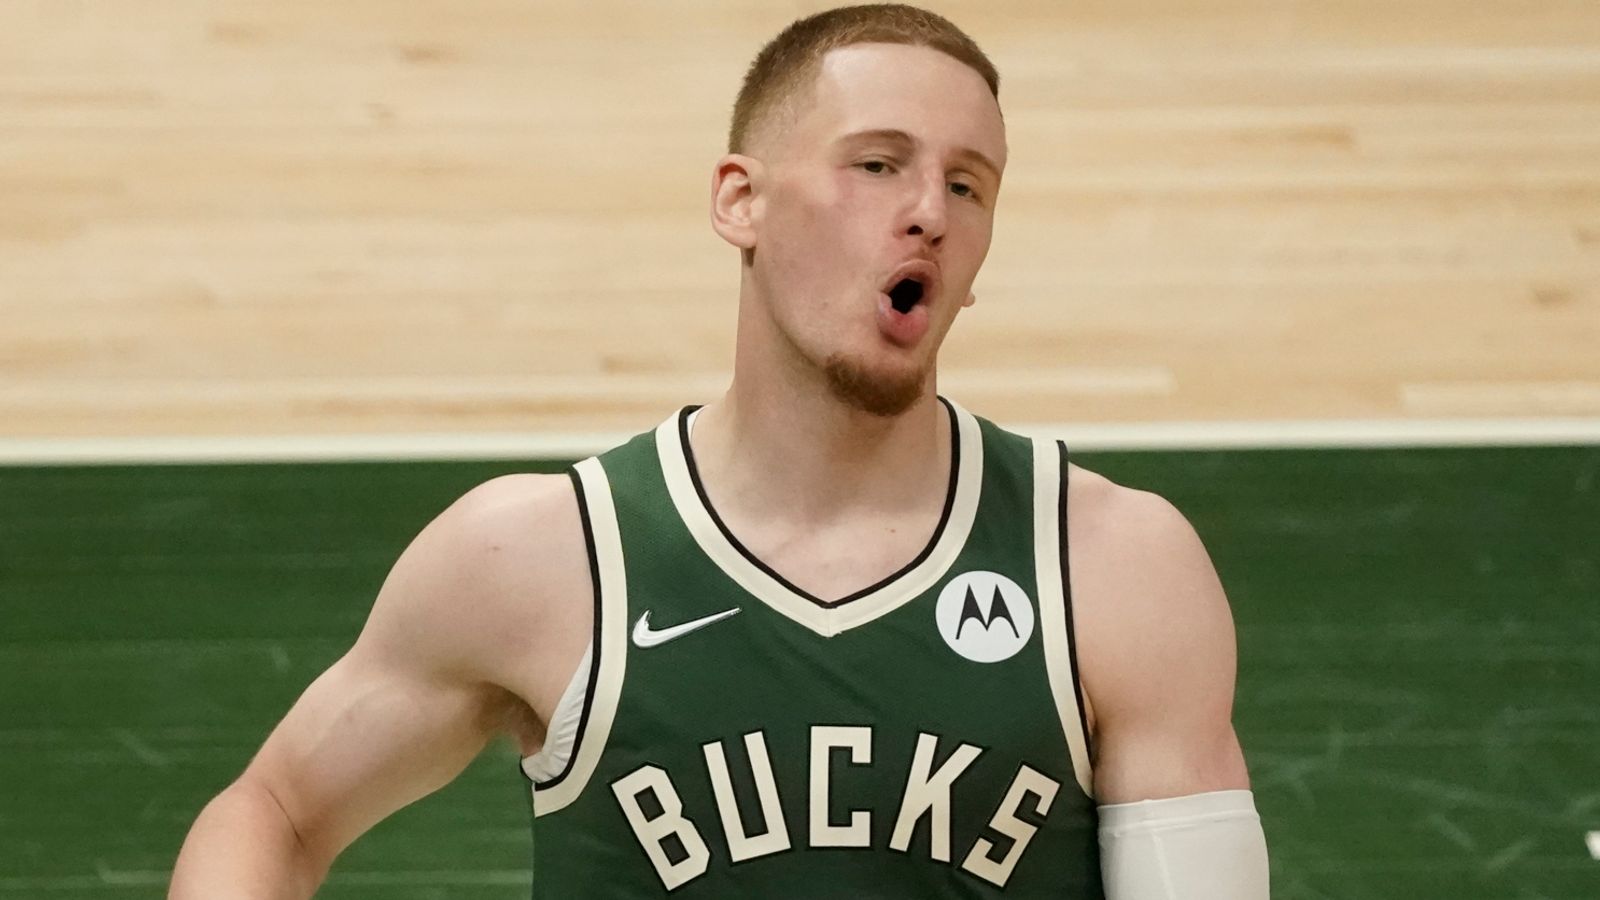 The story of DiVincenzo's 'White Donte' nickname